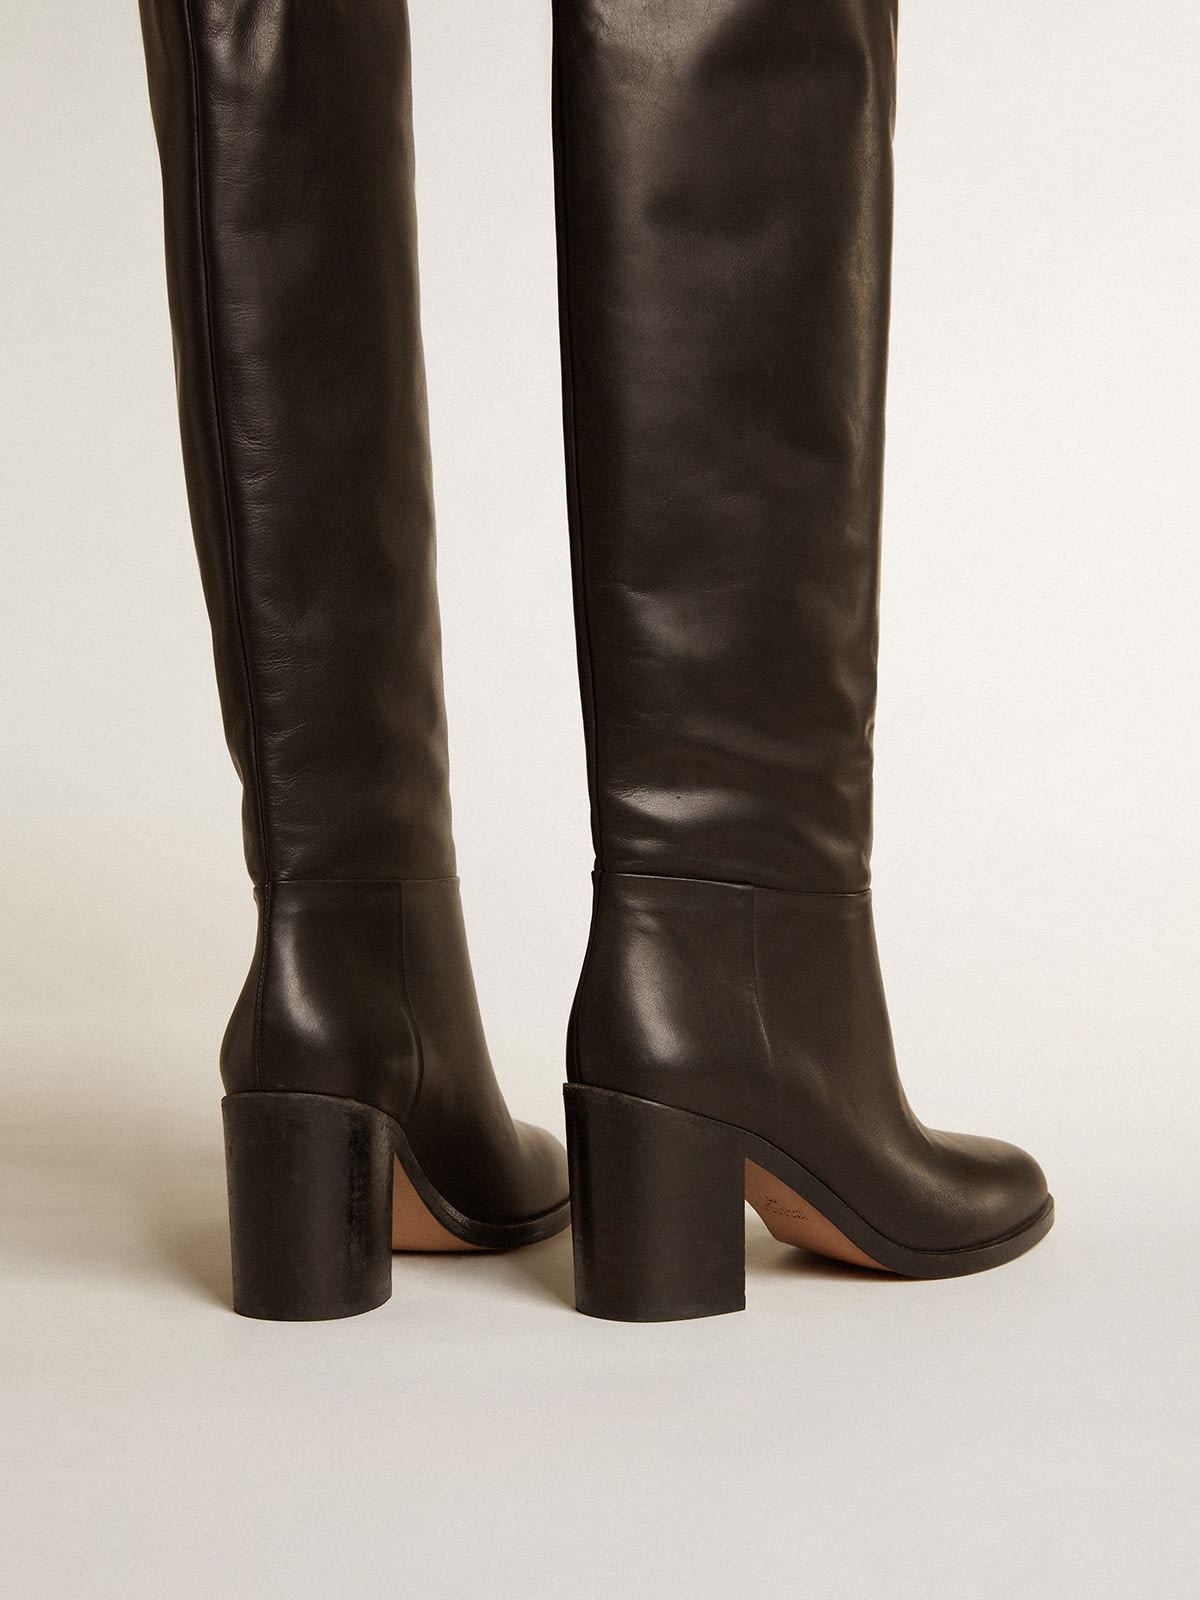 Vivienne knee-high boots in black leather - 5